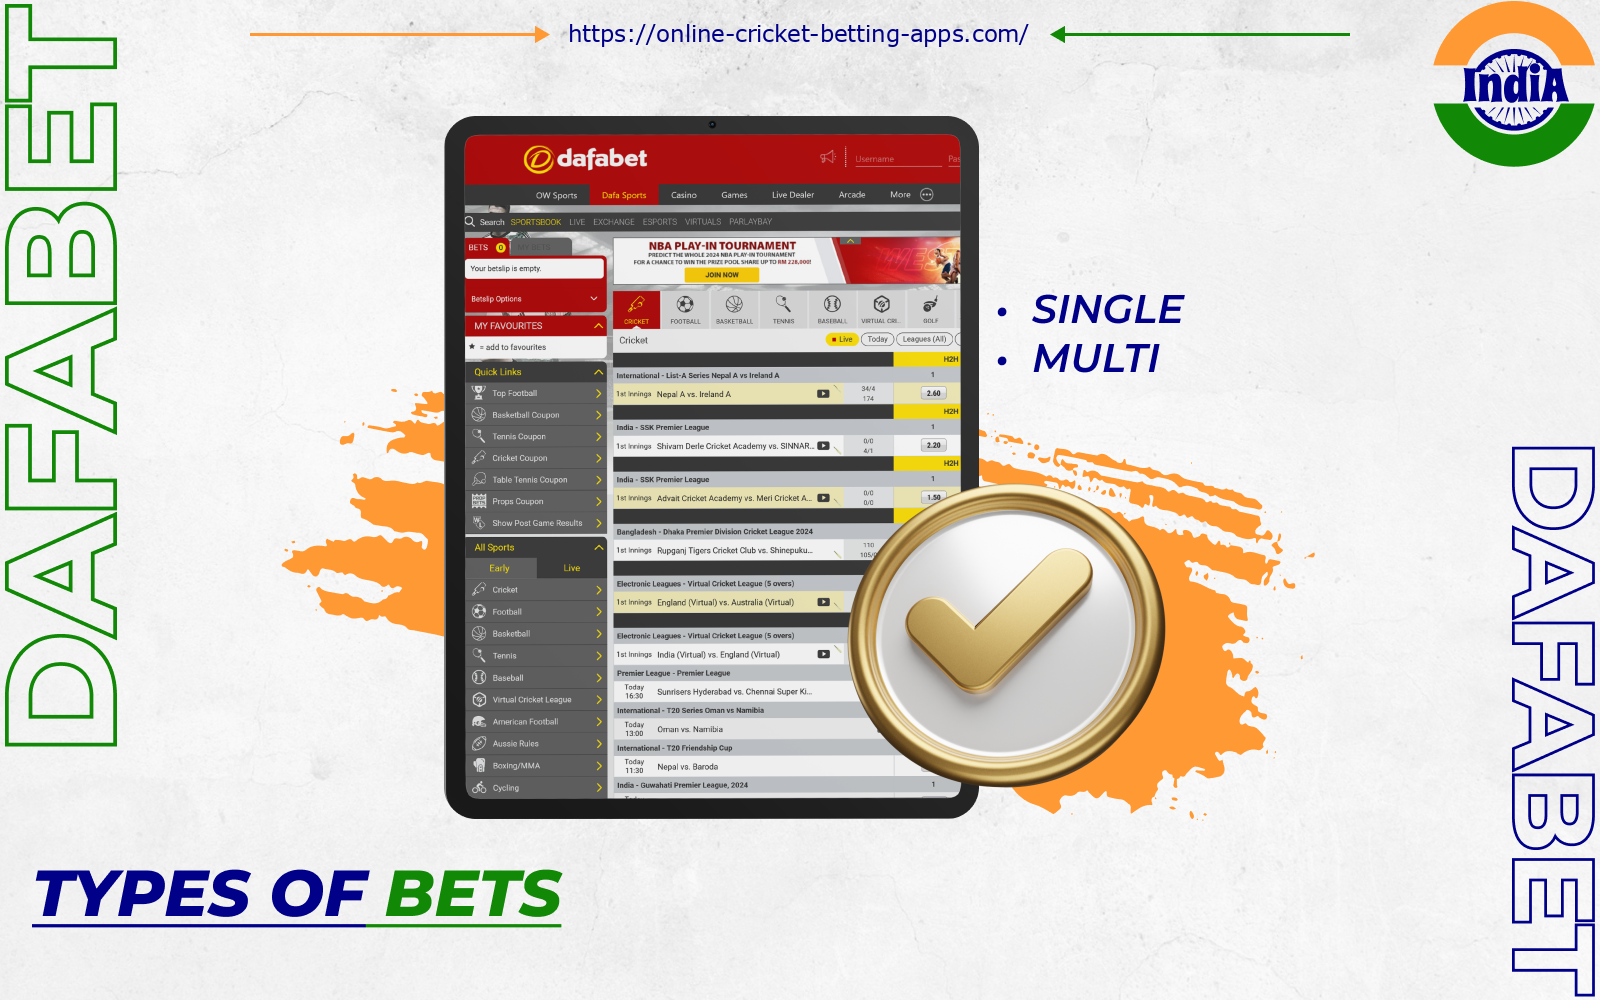 To enhance the betting experience for Indian users, Dafabet has added both single and multi bets